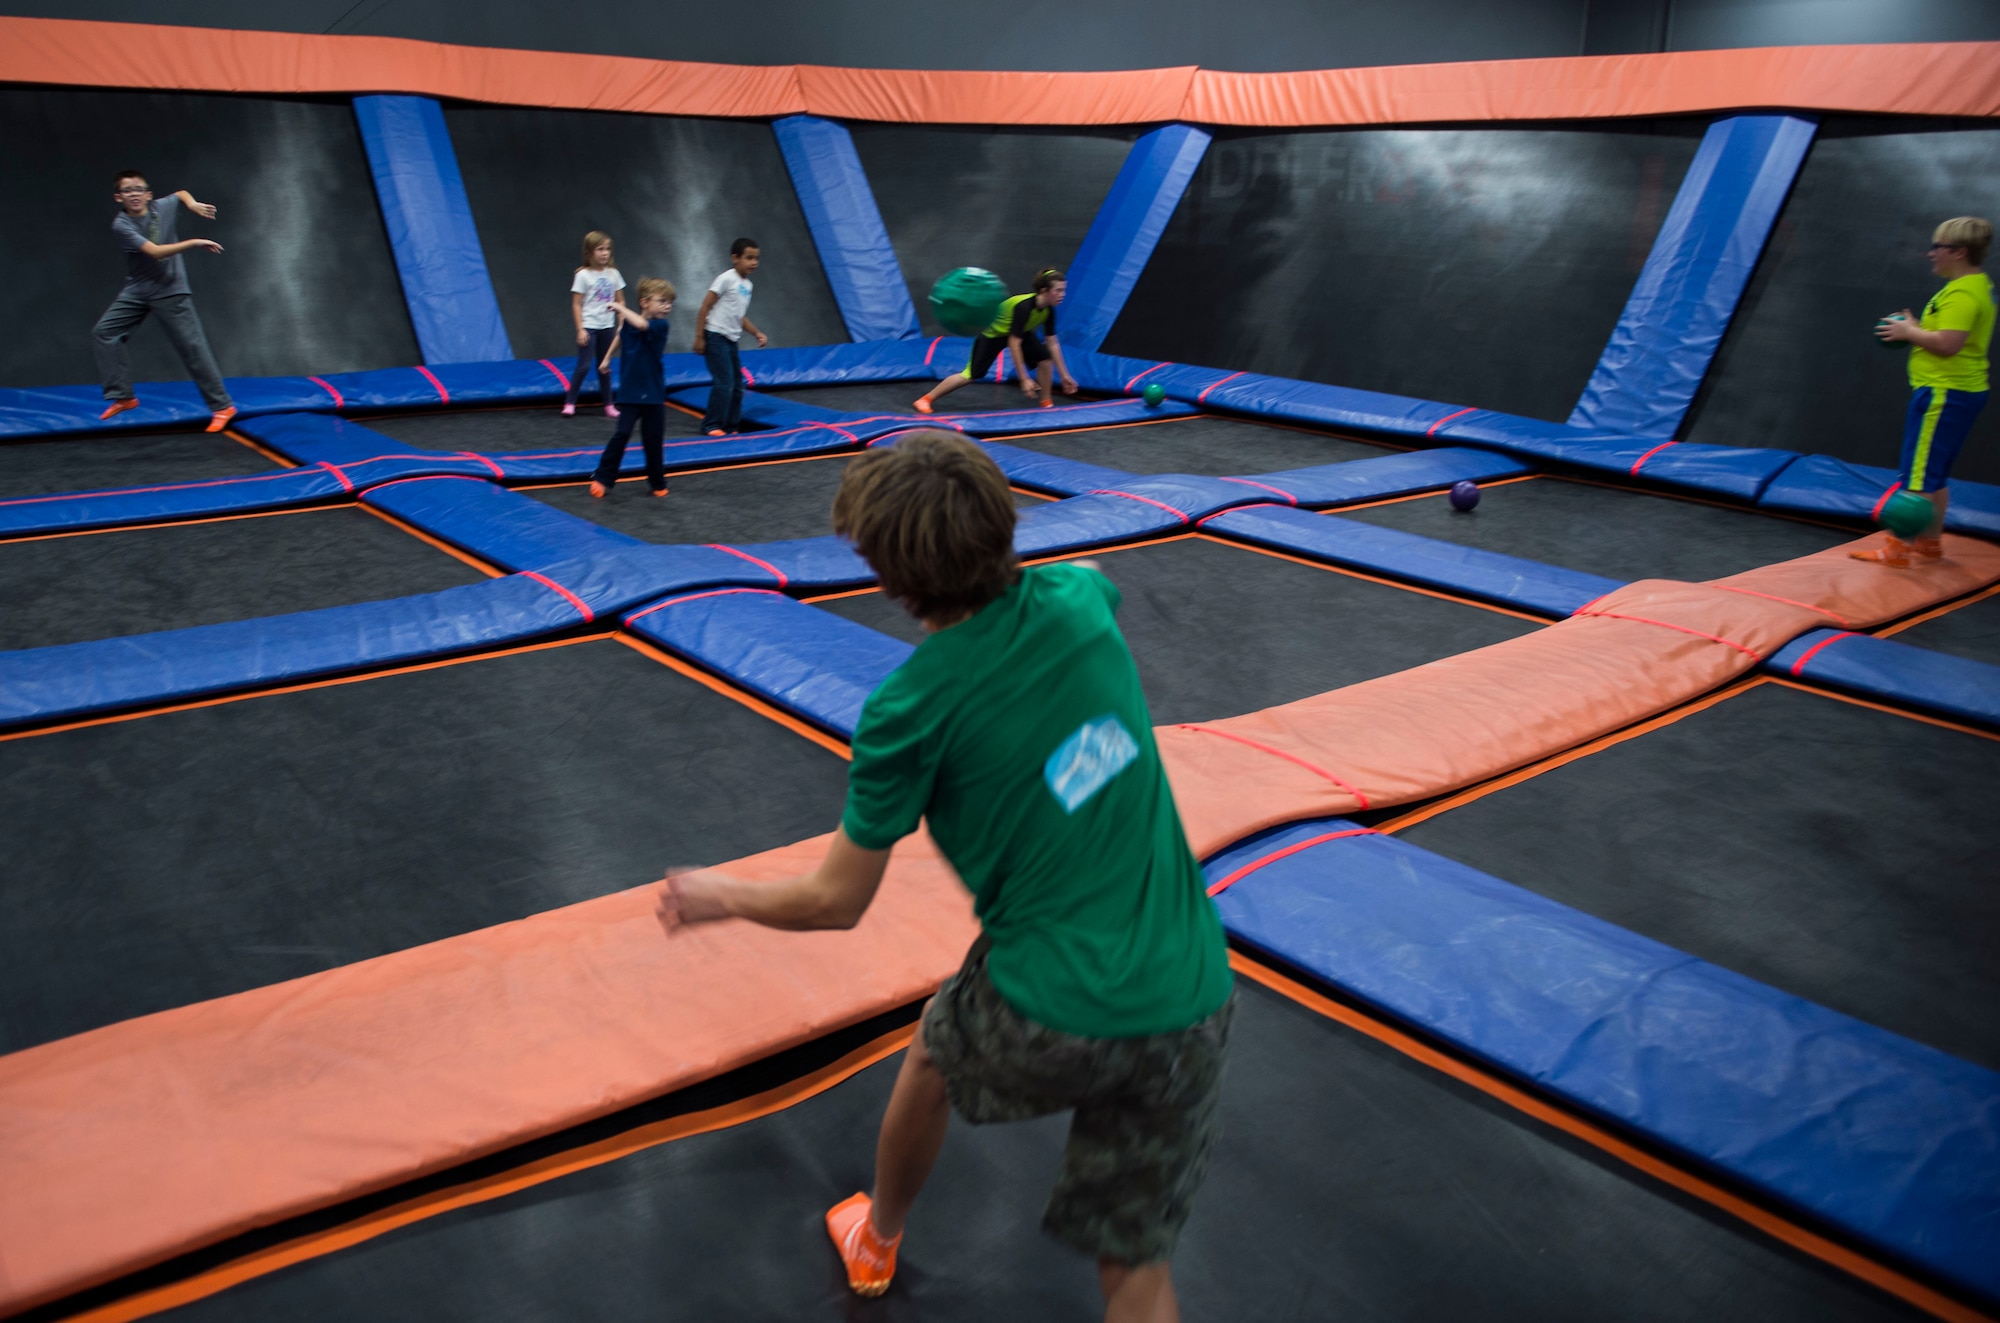 Families of deployed Air Commandos play dodgeball during a Heart Apart event at the Sky Zone in Pensacola, Fla., Jan. 28, 2017.  During the two-hour event, families had the opportunity to jump on the trampolines, eat pizza and connect with families going through similar experiences. (U.S. Air Force photo by Senior Airman Krystal M. Garrett)